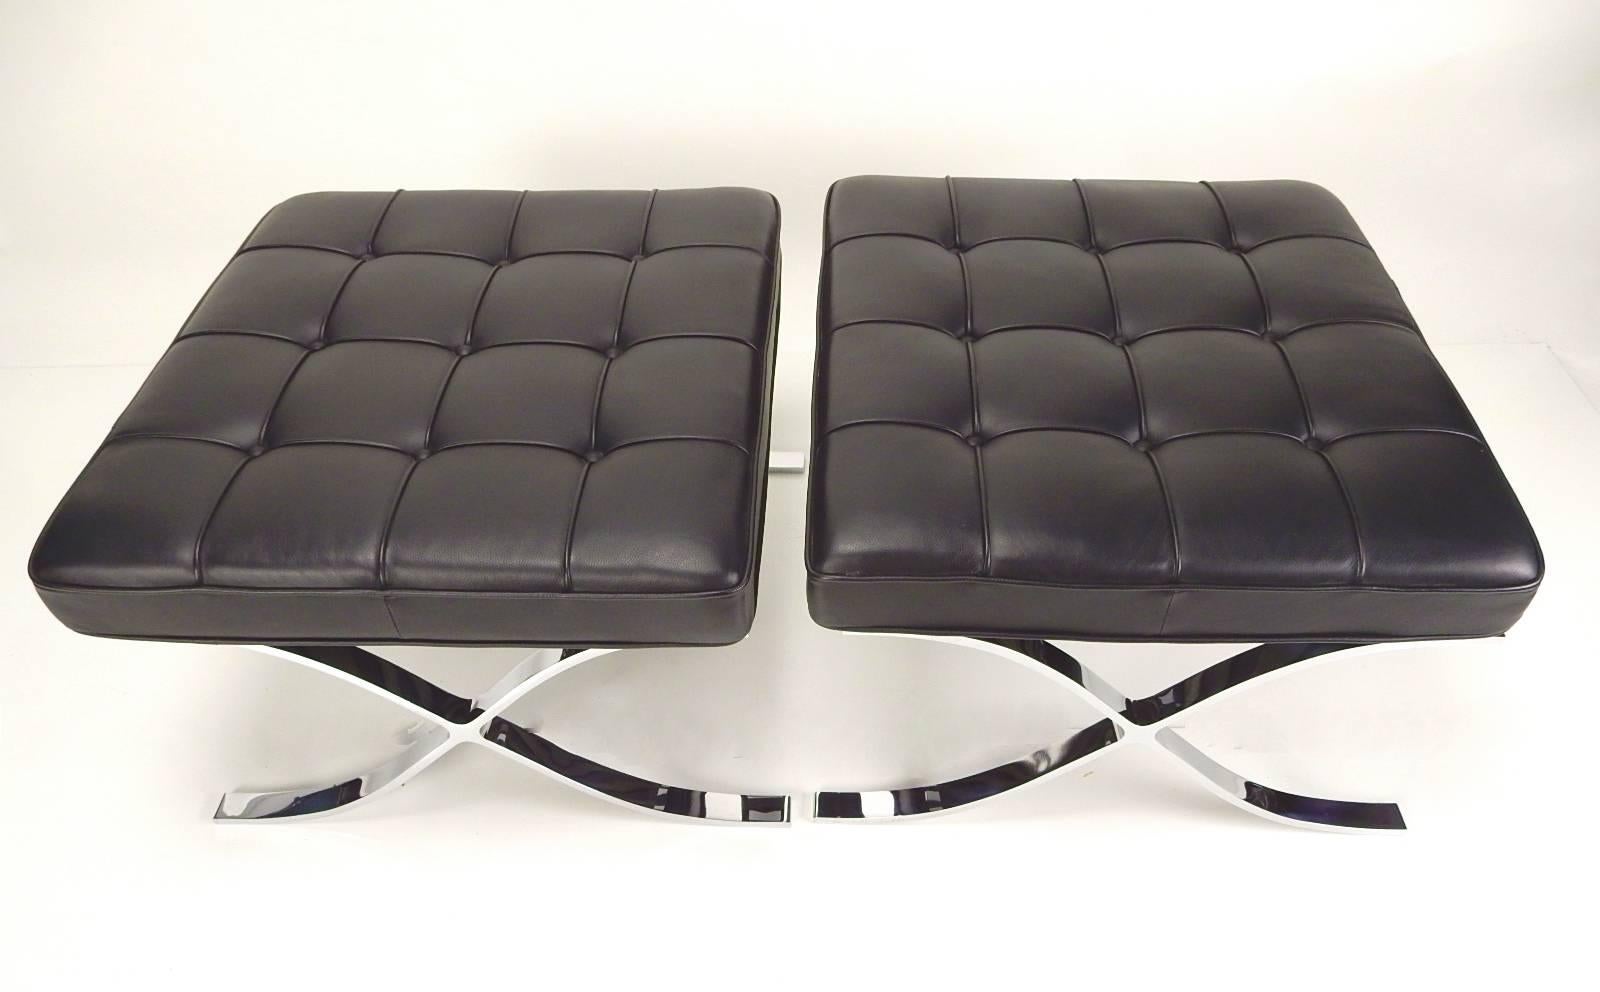 Bauhaus Barcelona Chair Ottomas by Ludwig Mies van der Rohe for Knoll